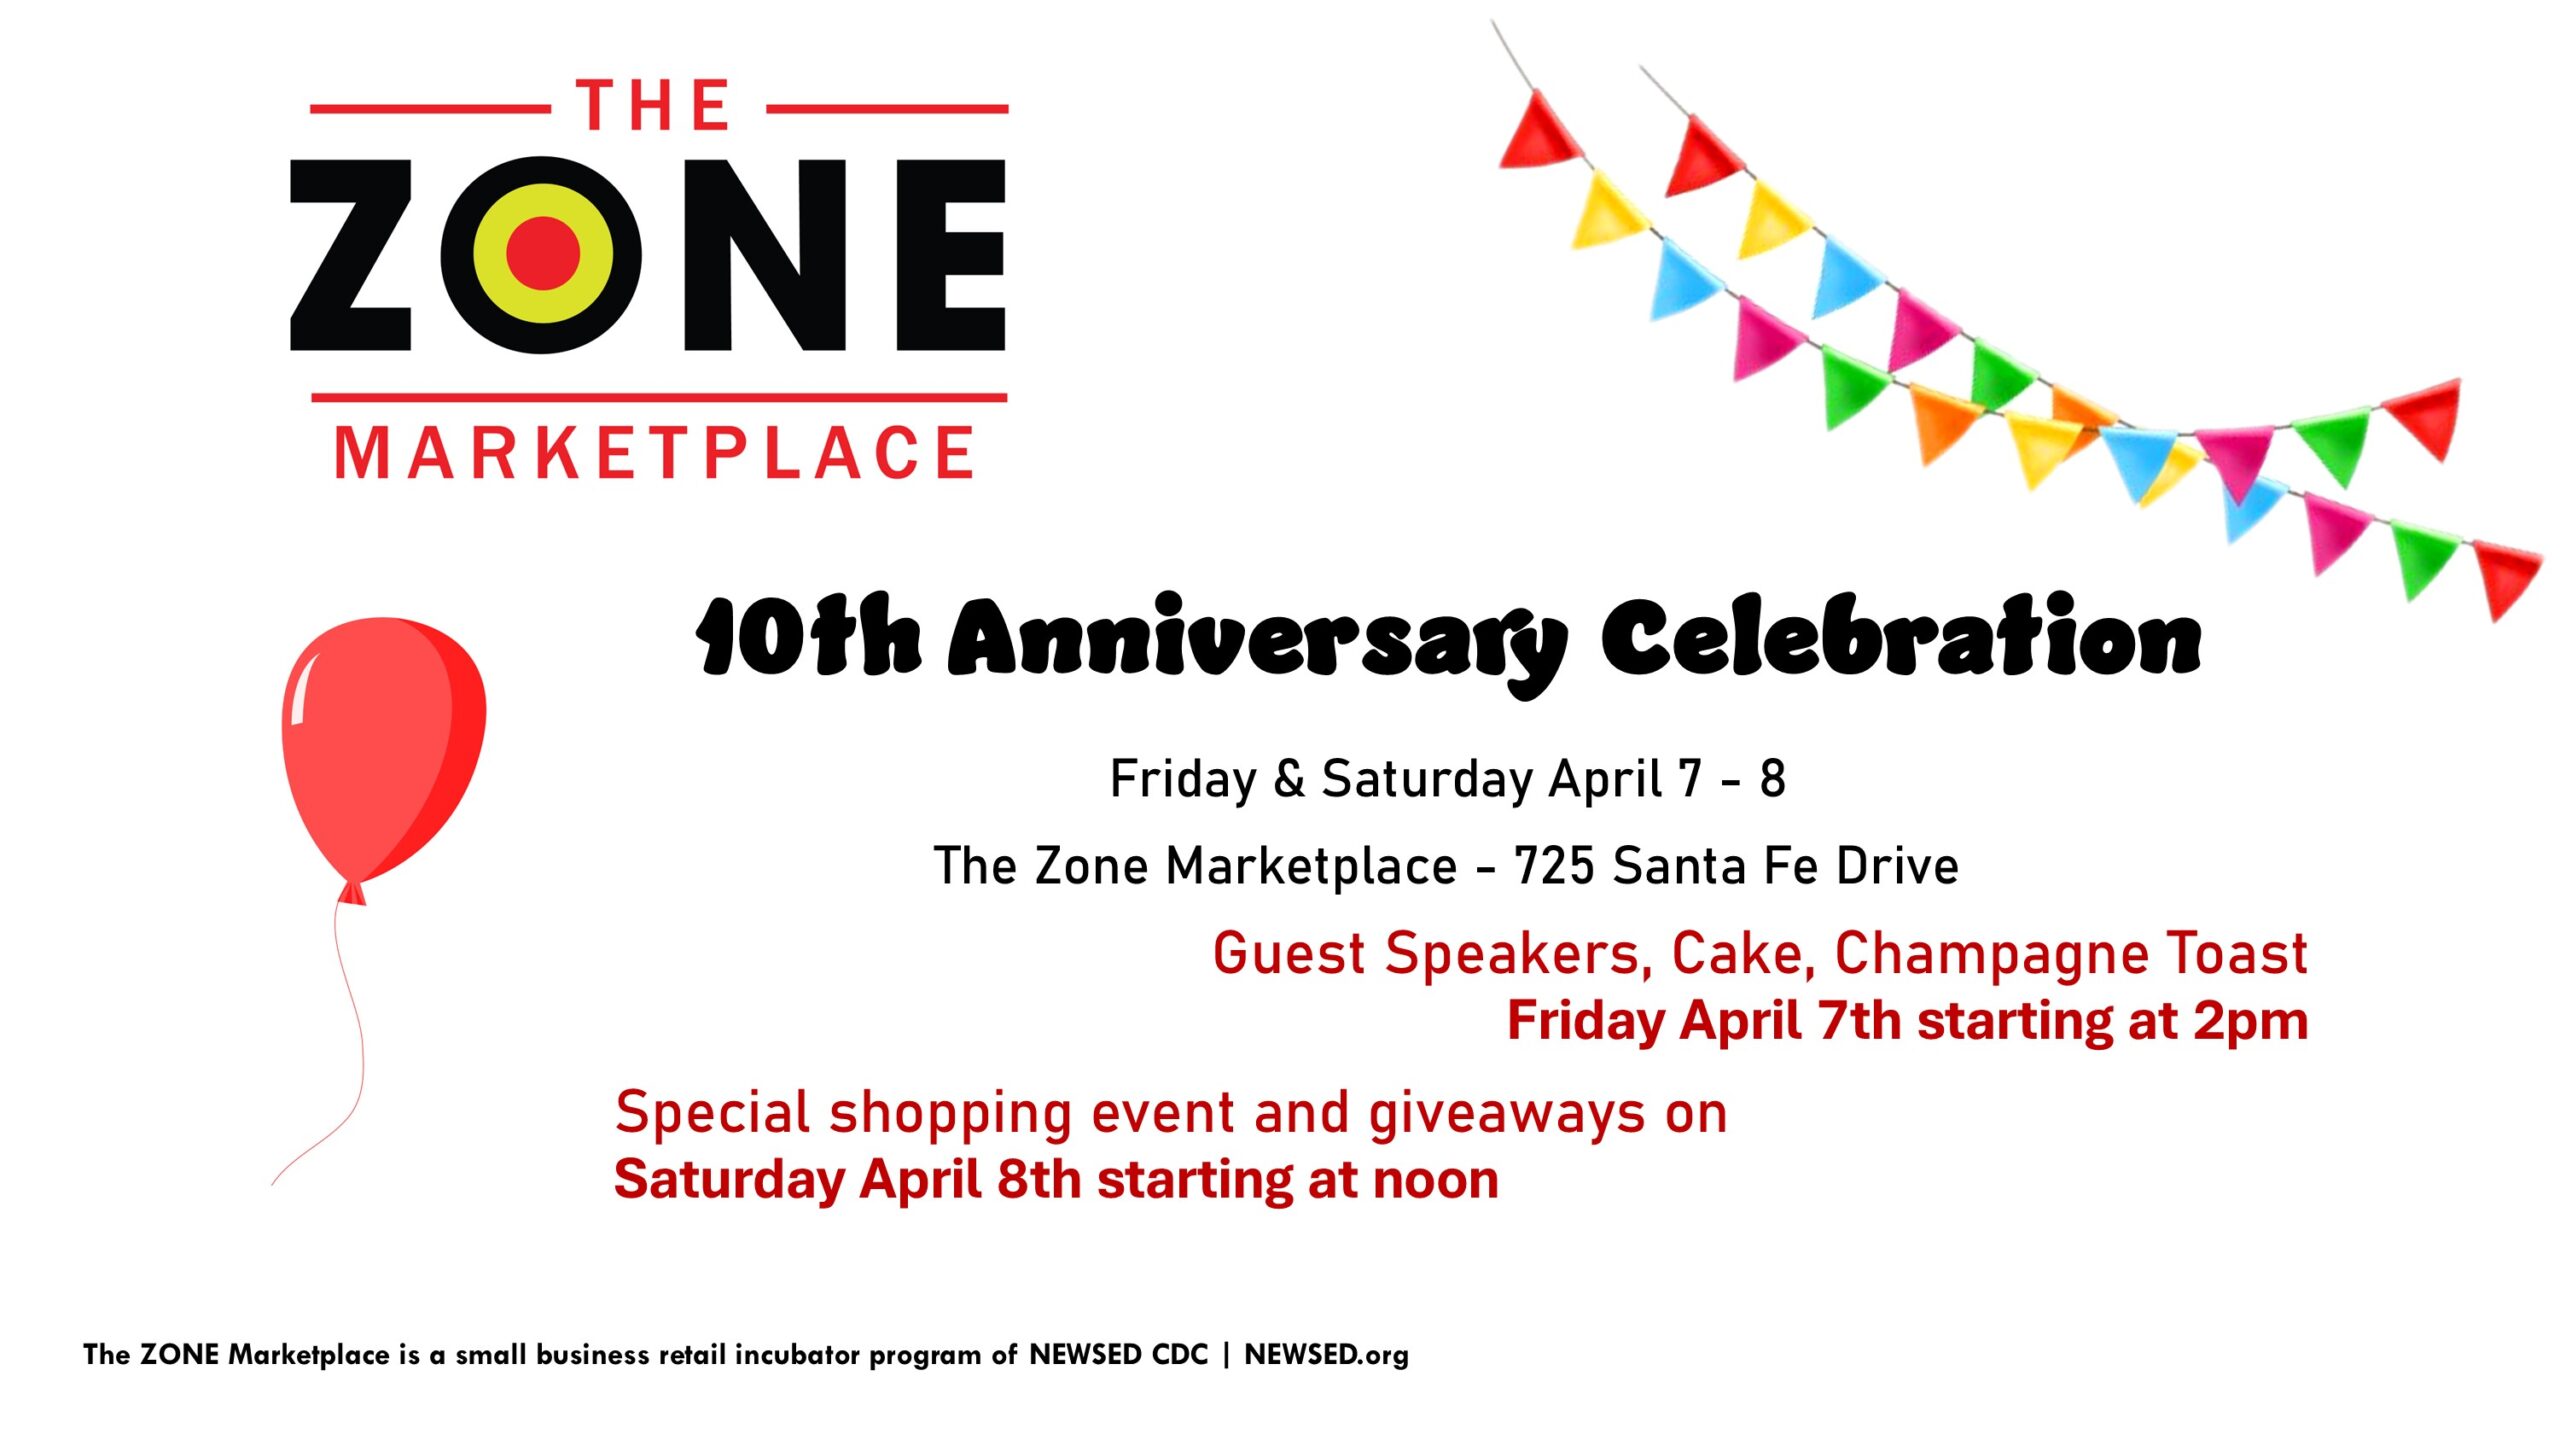 The ZONE Marketplace 10th Anniversary Celebration Friday & Saturday April 7 - 8 The Zone Marketplace - 725 Santa Fe Drive Guest Speakers, Cake, Champagne Toast Friday April 7th starting at 2pm Special shopping event and giveaways on Saturday April 8th starting at noon